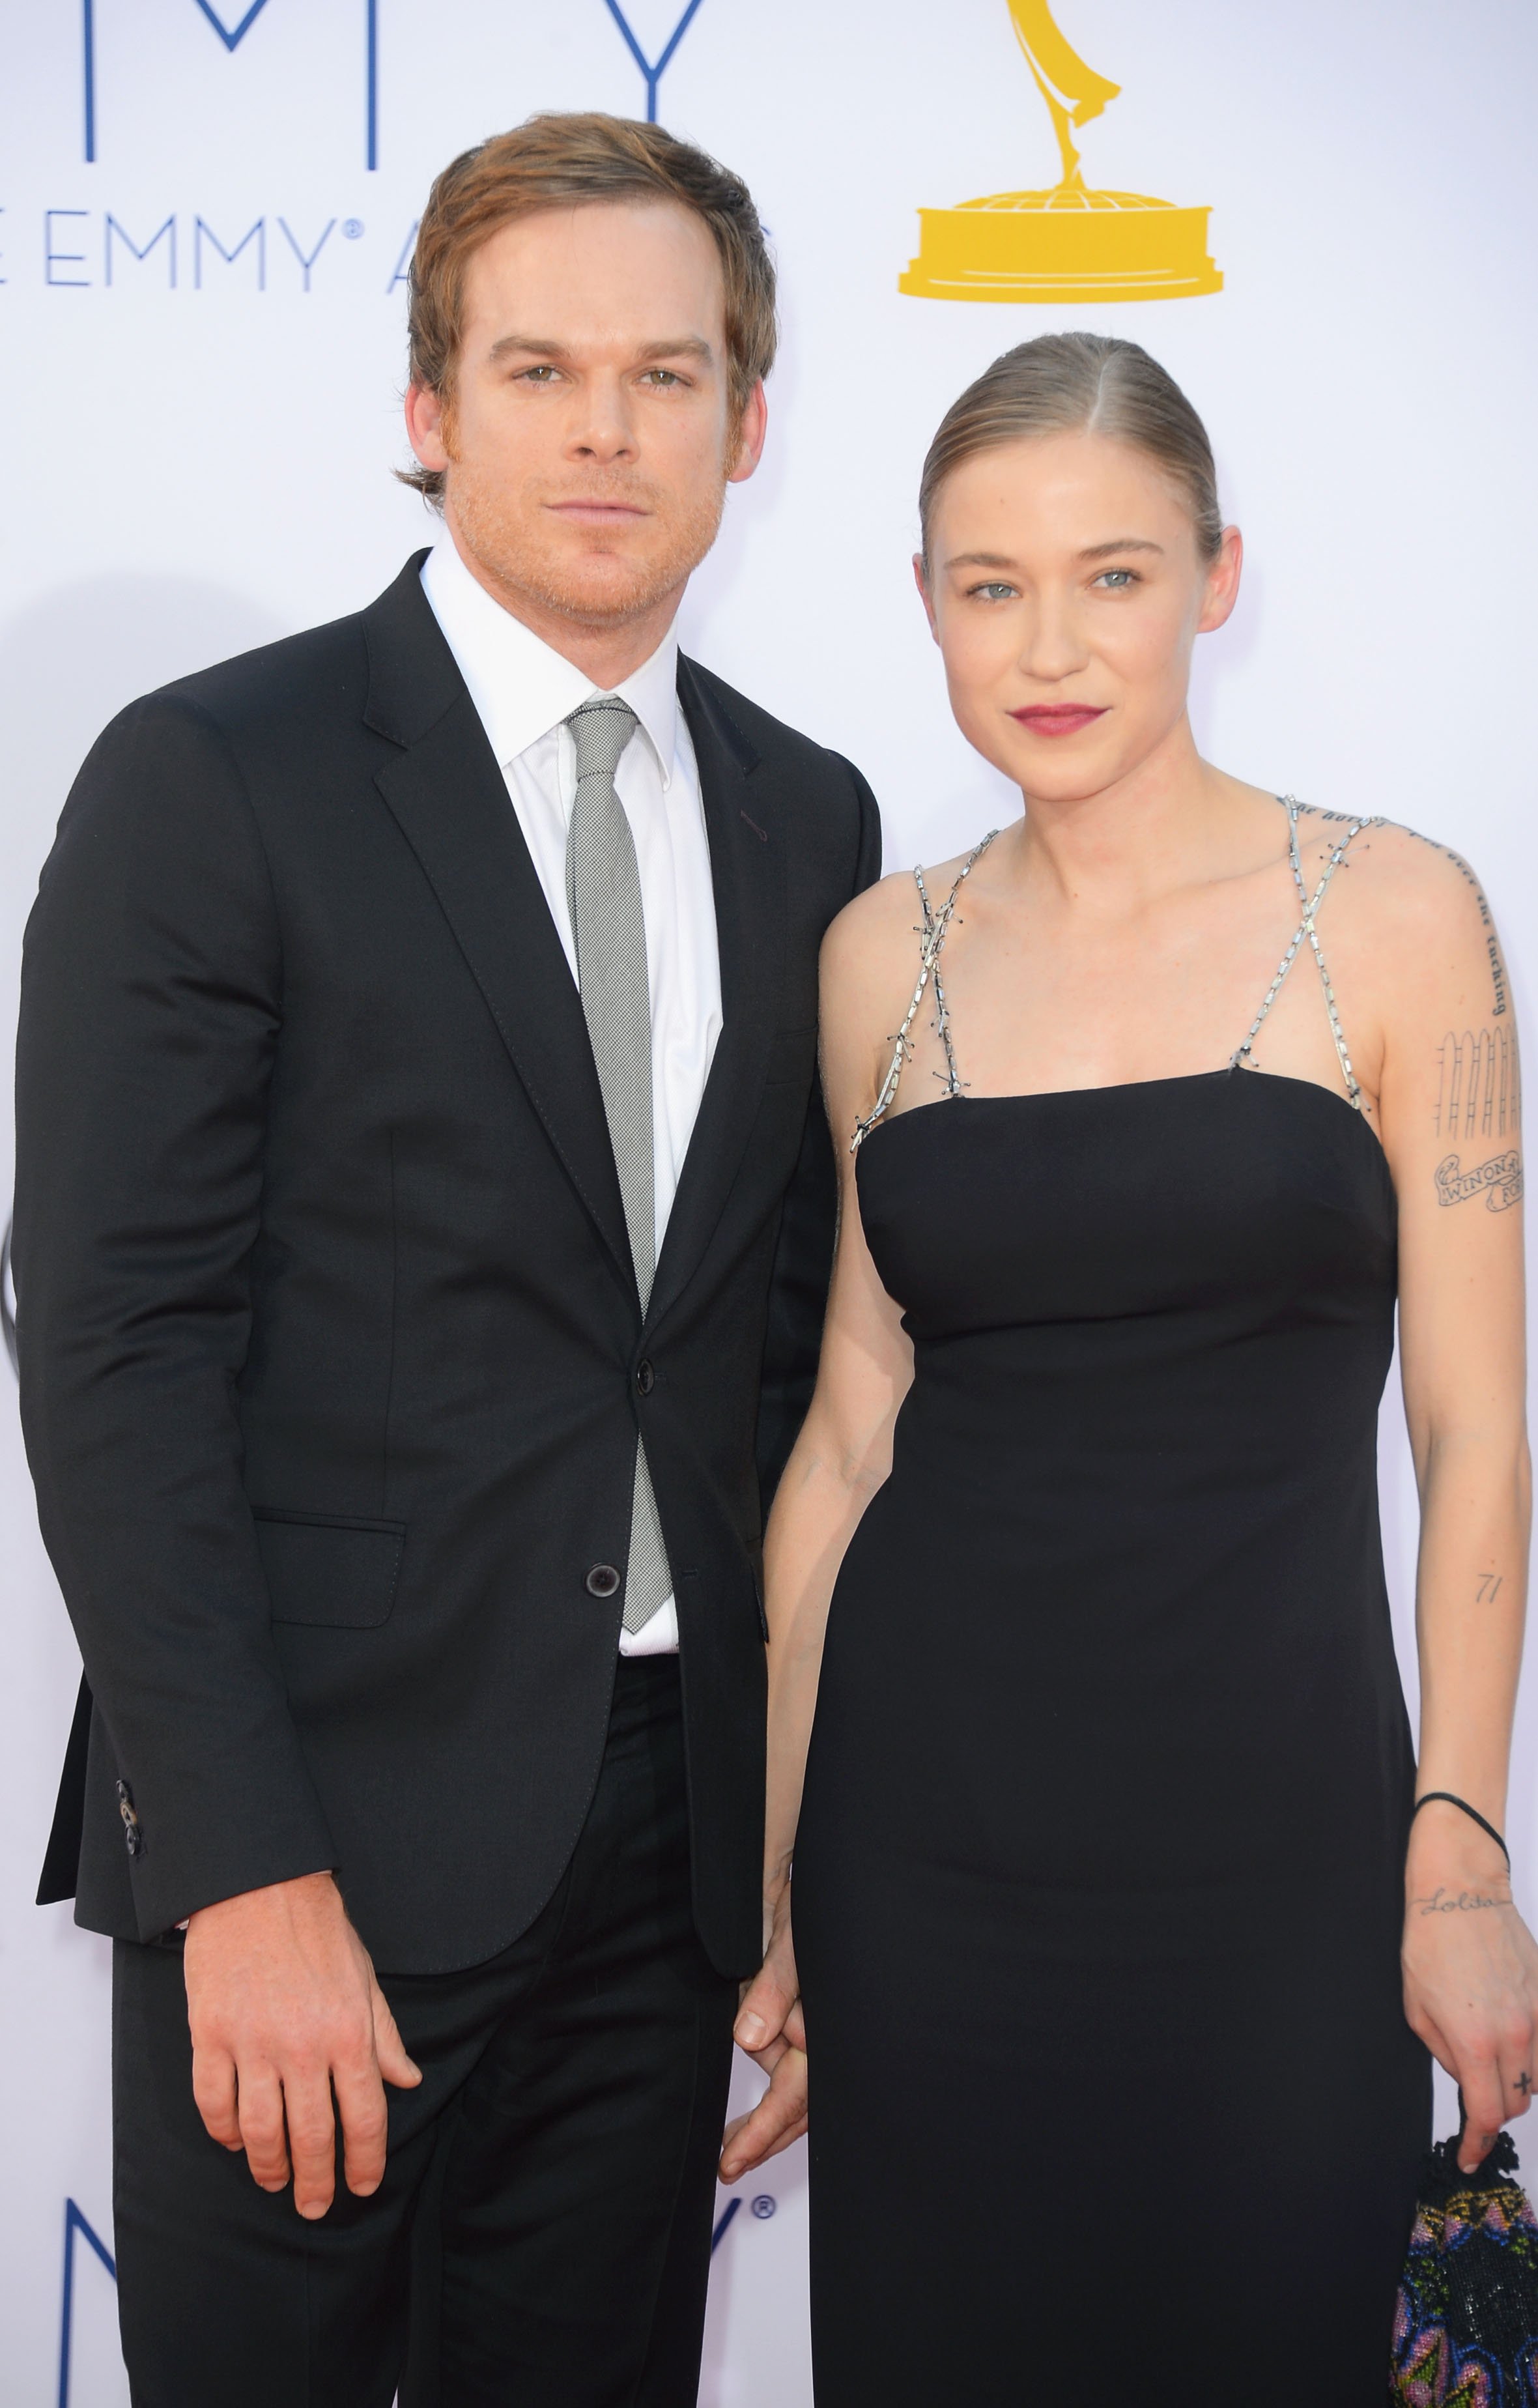 Michael C. Hall and Morgan MacGregor arrive at the 64th Annual Primetime Emmy Awards at Nokia Theatre L.A. Live in Los Angeles, California on September 23, 2012 | Source: Getty Images